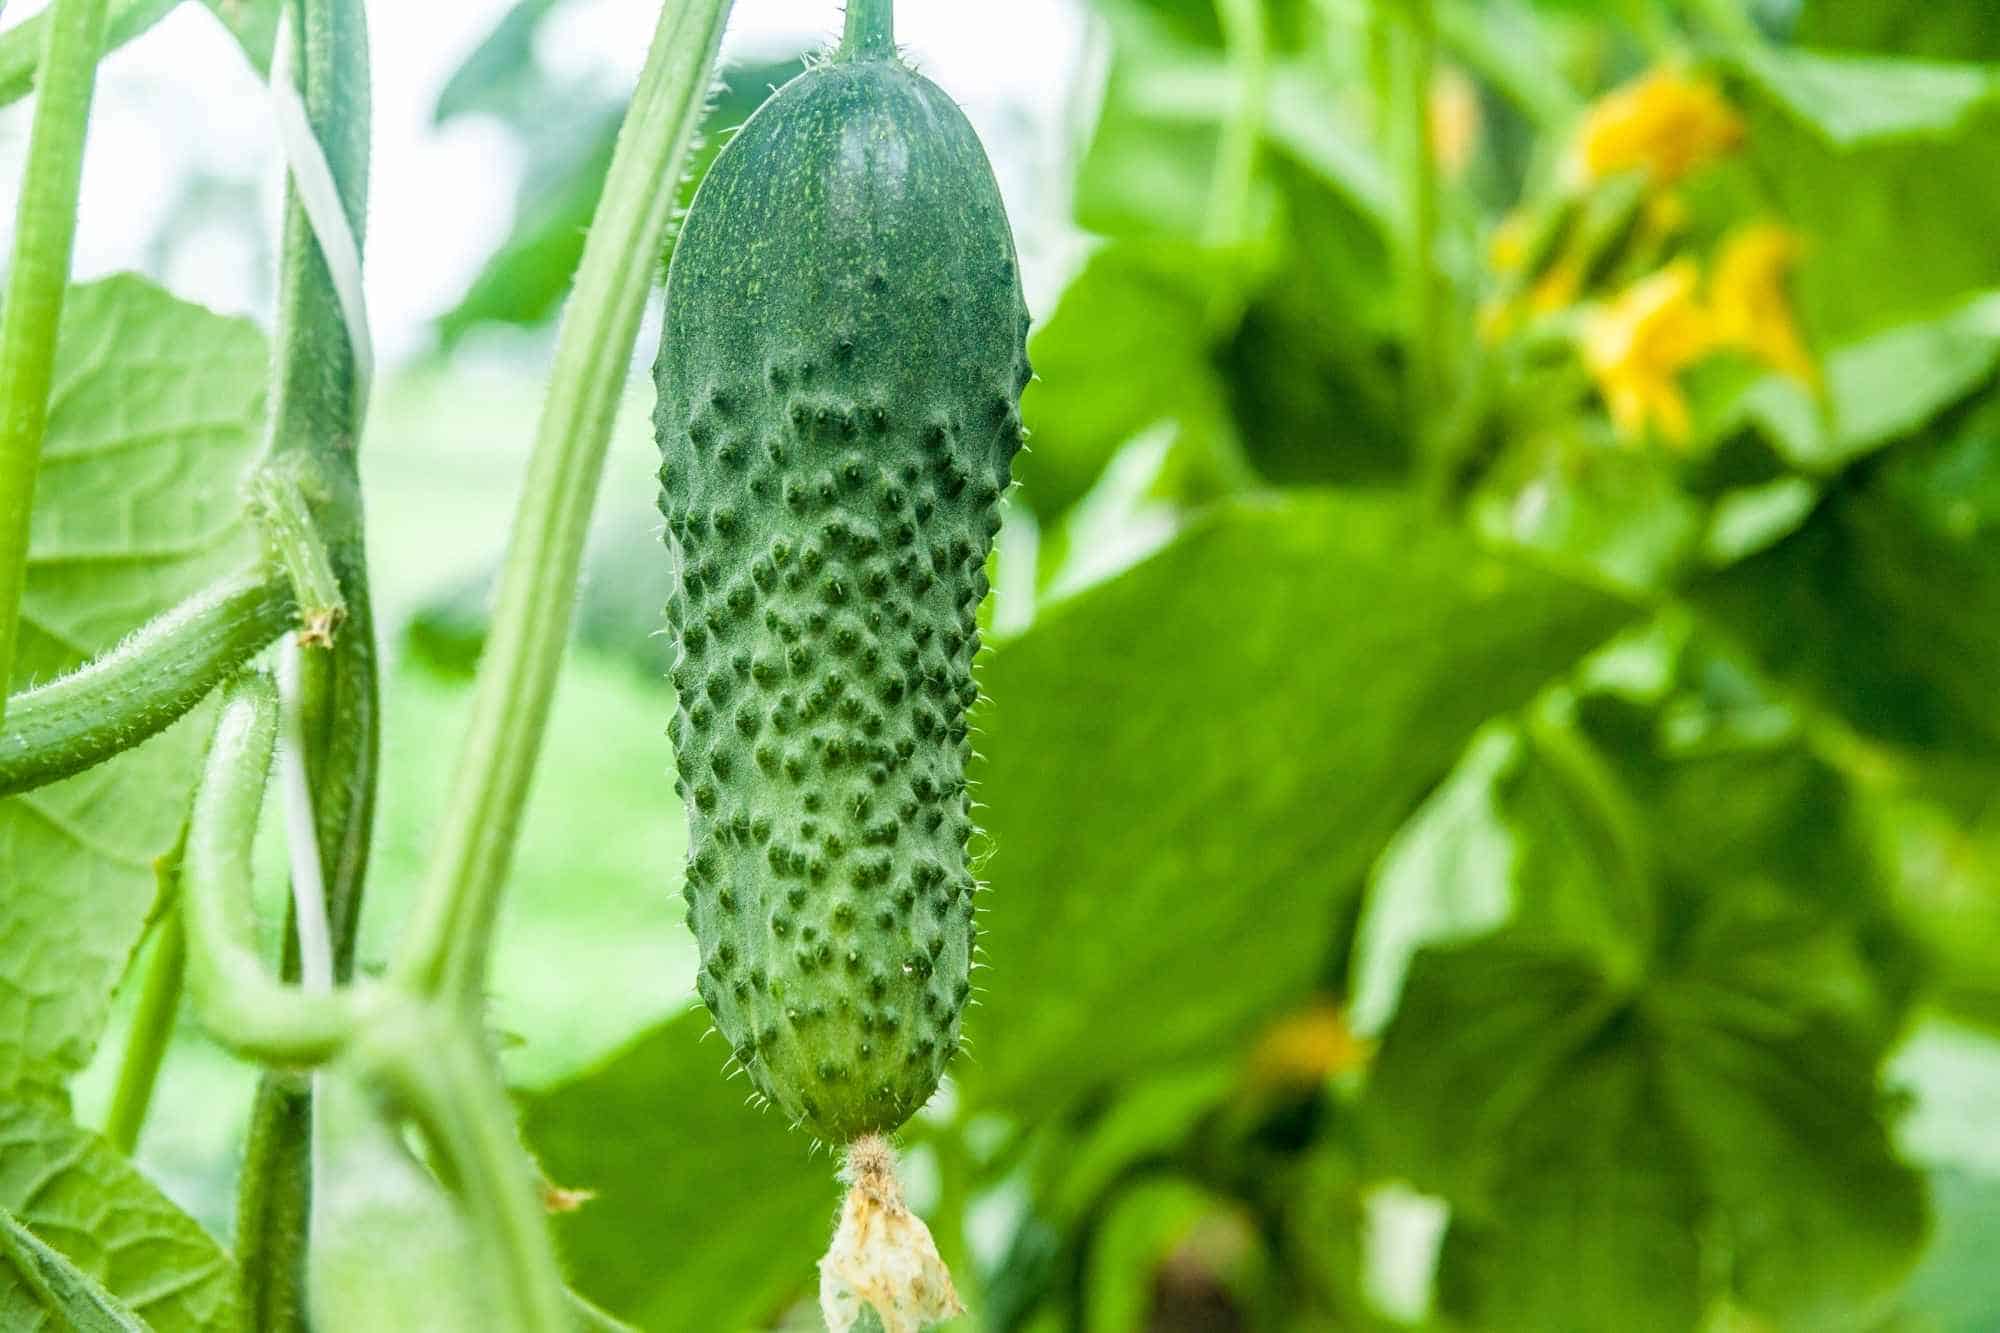 Cucumbers growing on the vine with yellow flowers in the background.